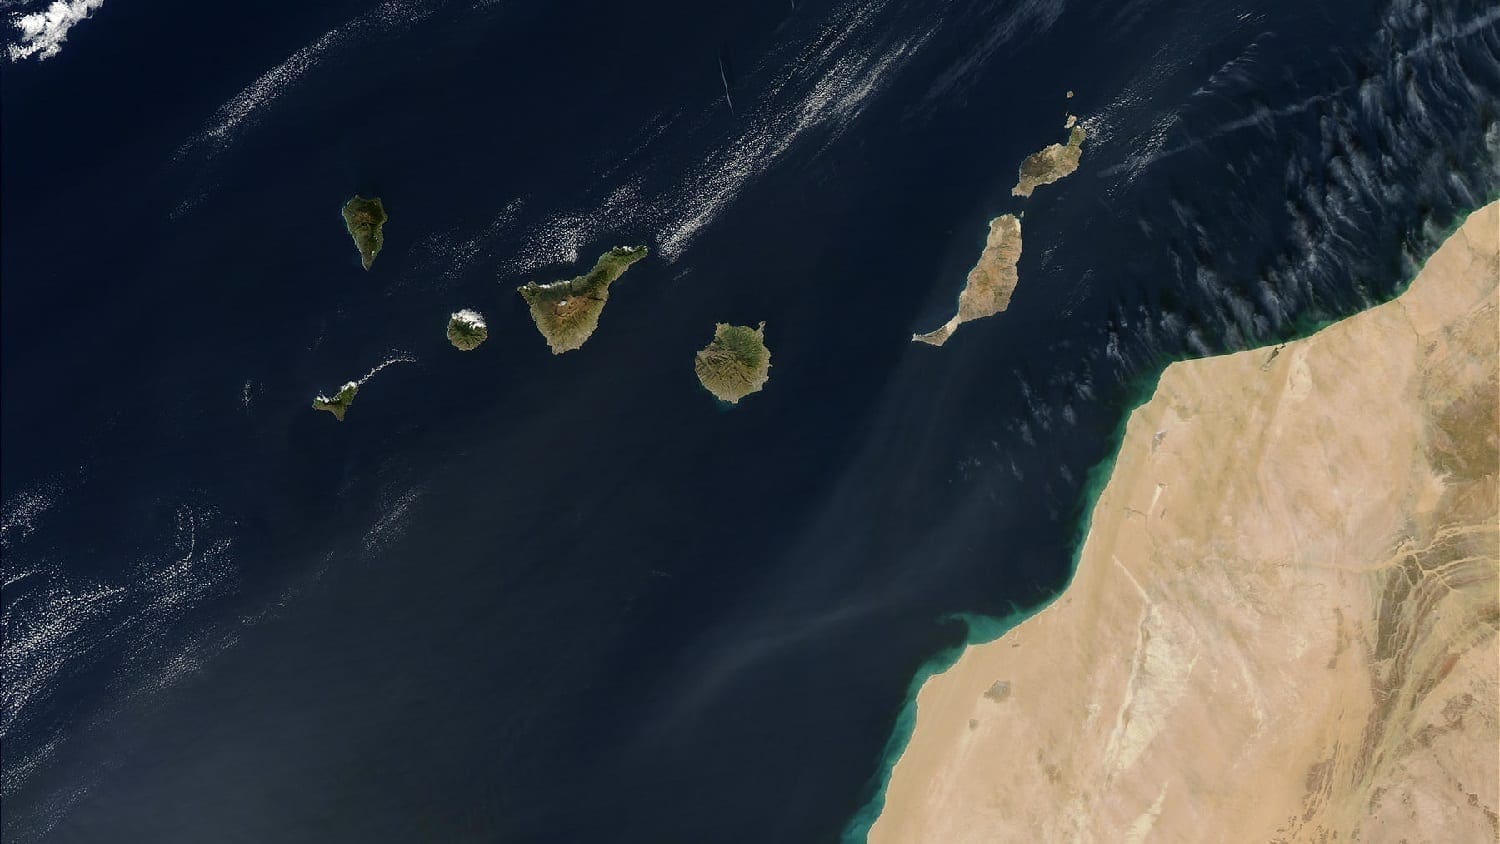 Canary Islands from space, photo credit: NASA